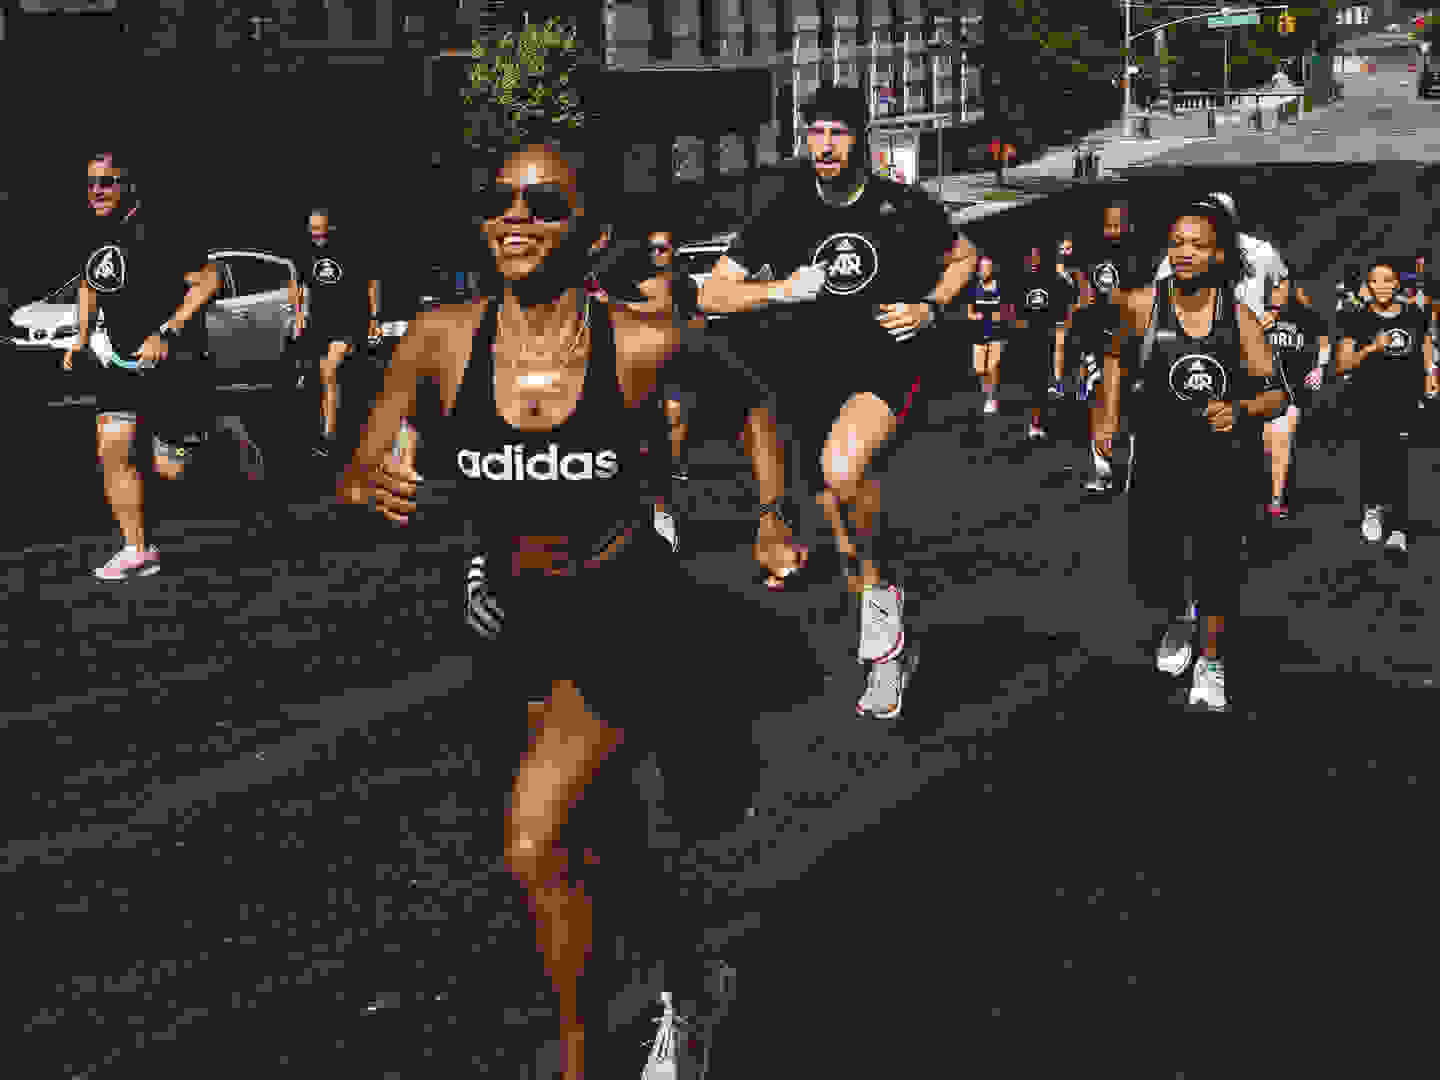 Group of runners on a street